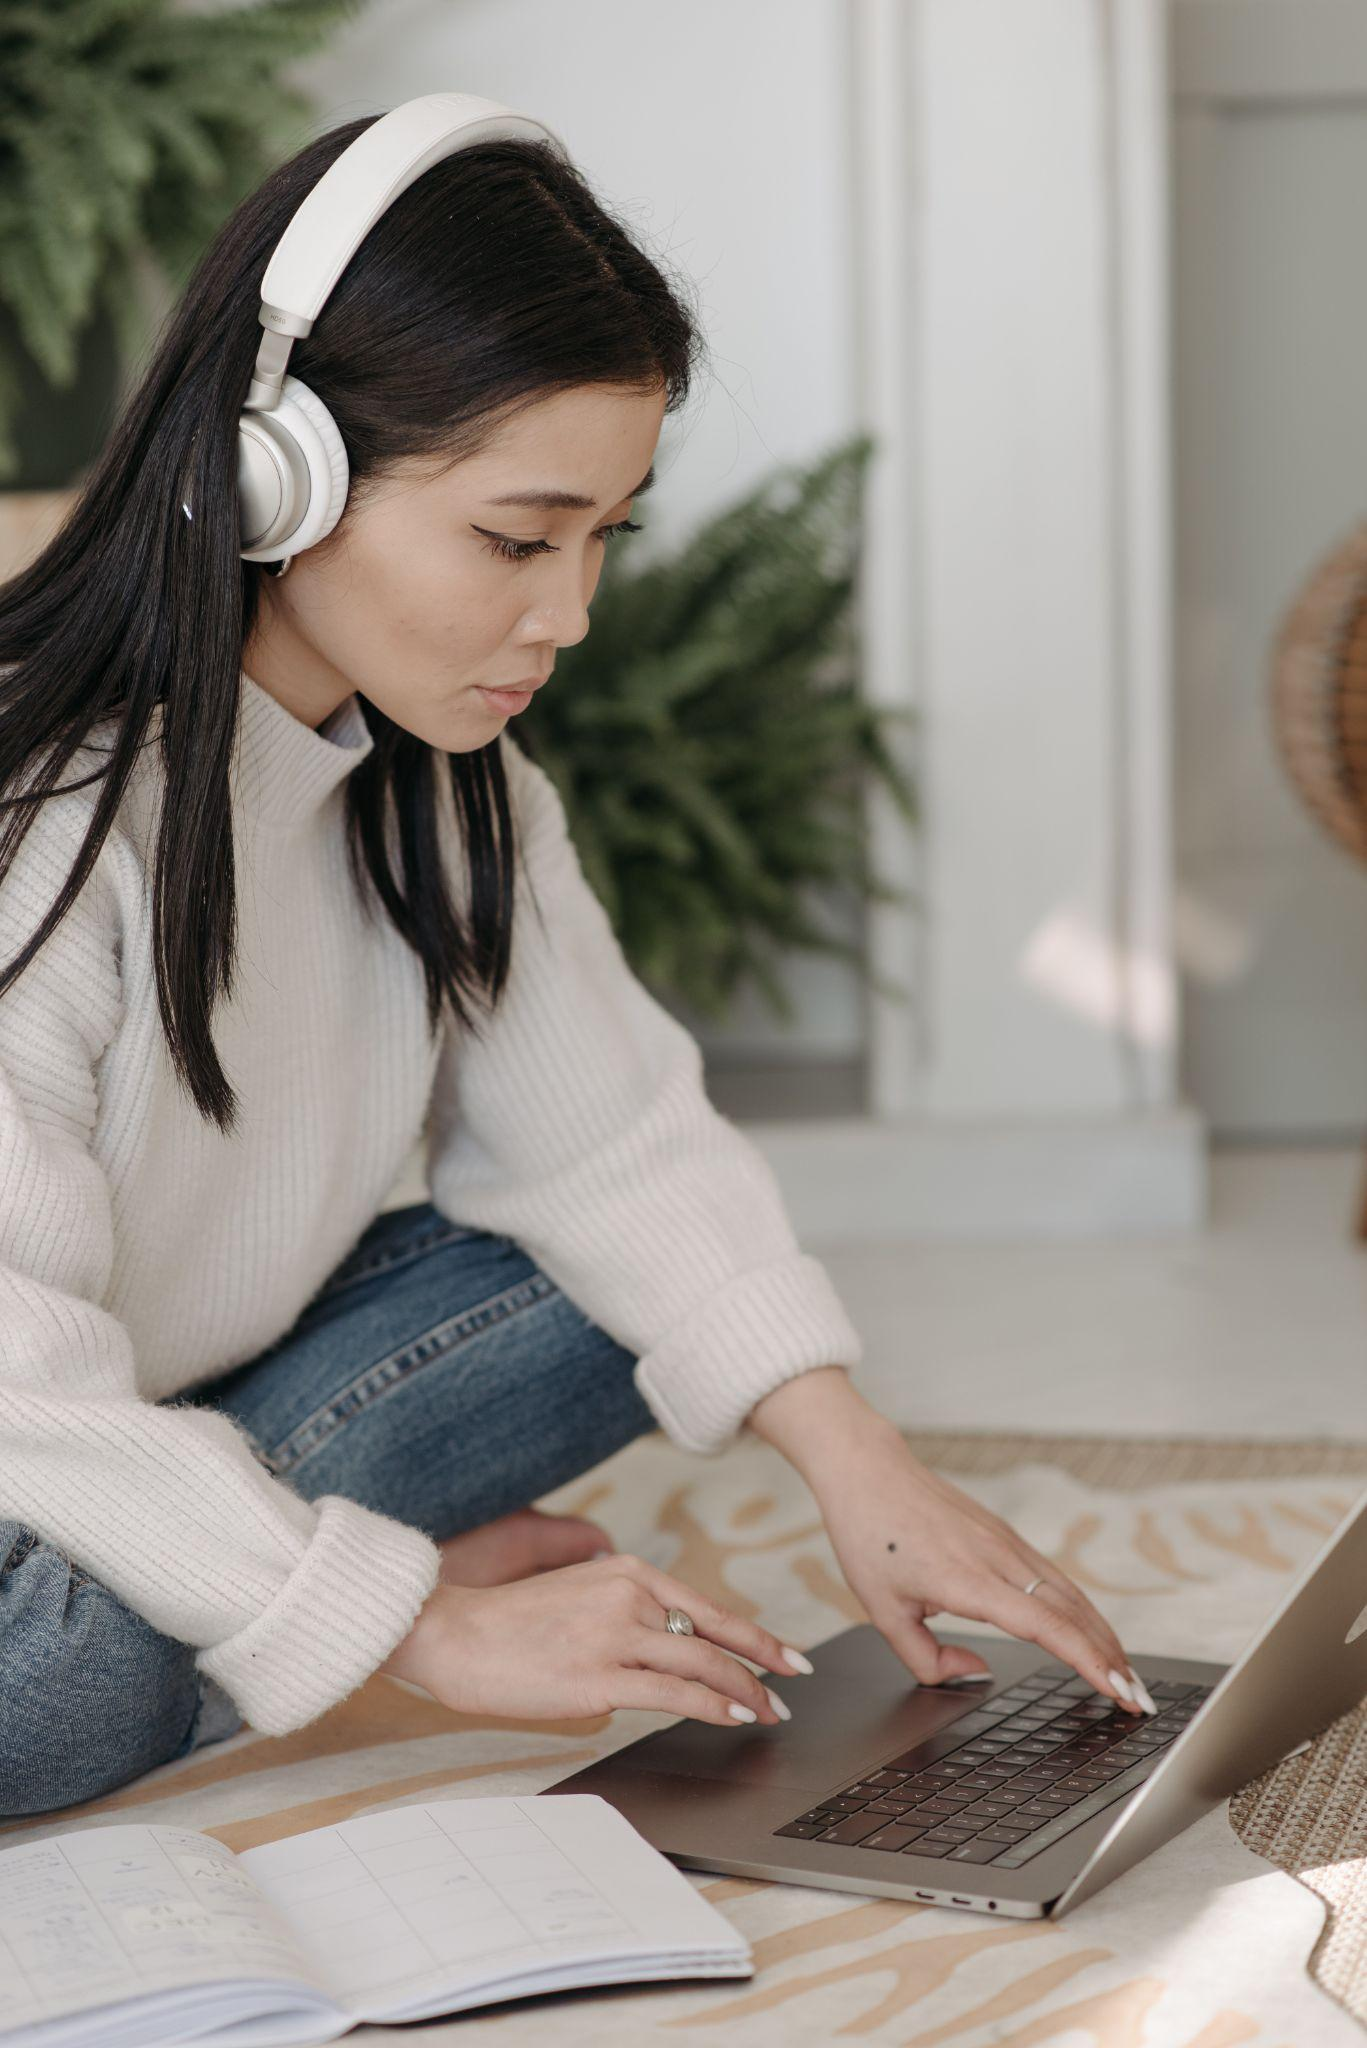 A girl listening to music while studying